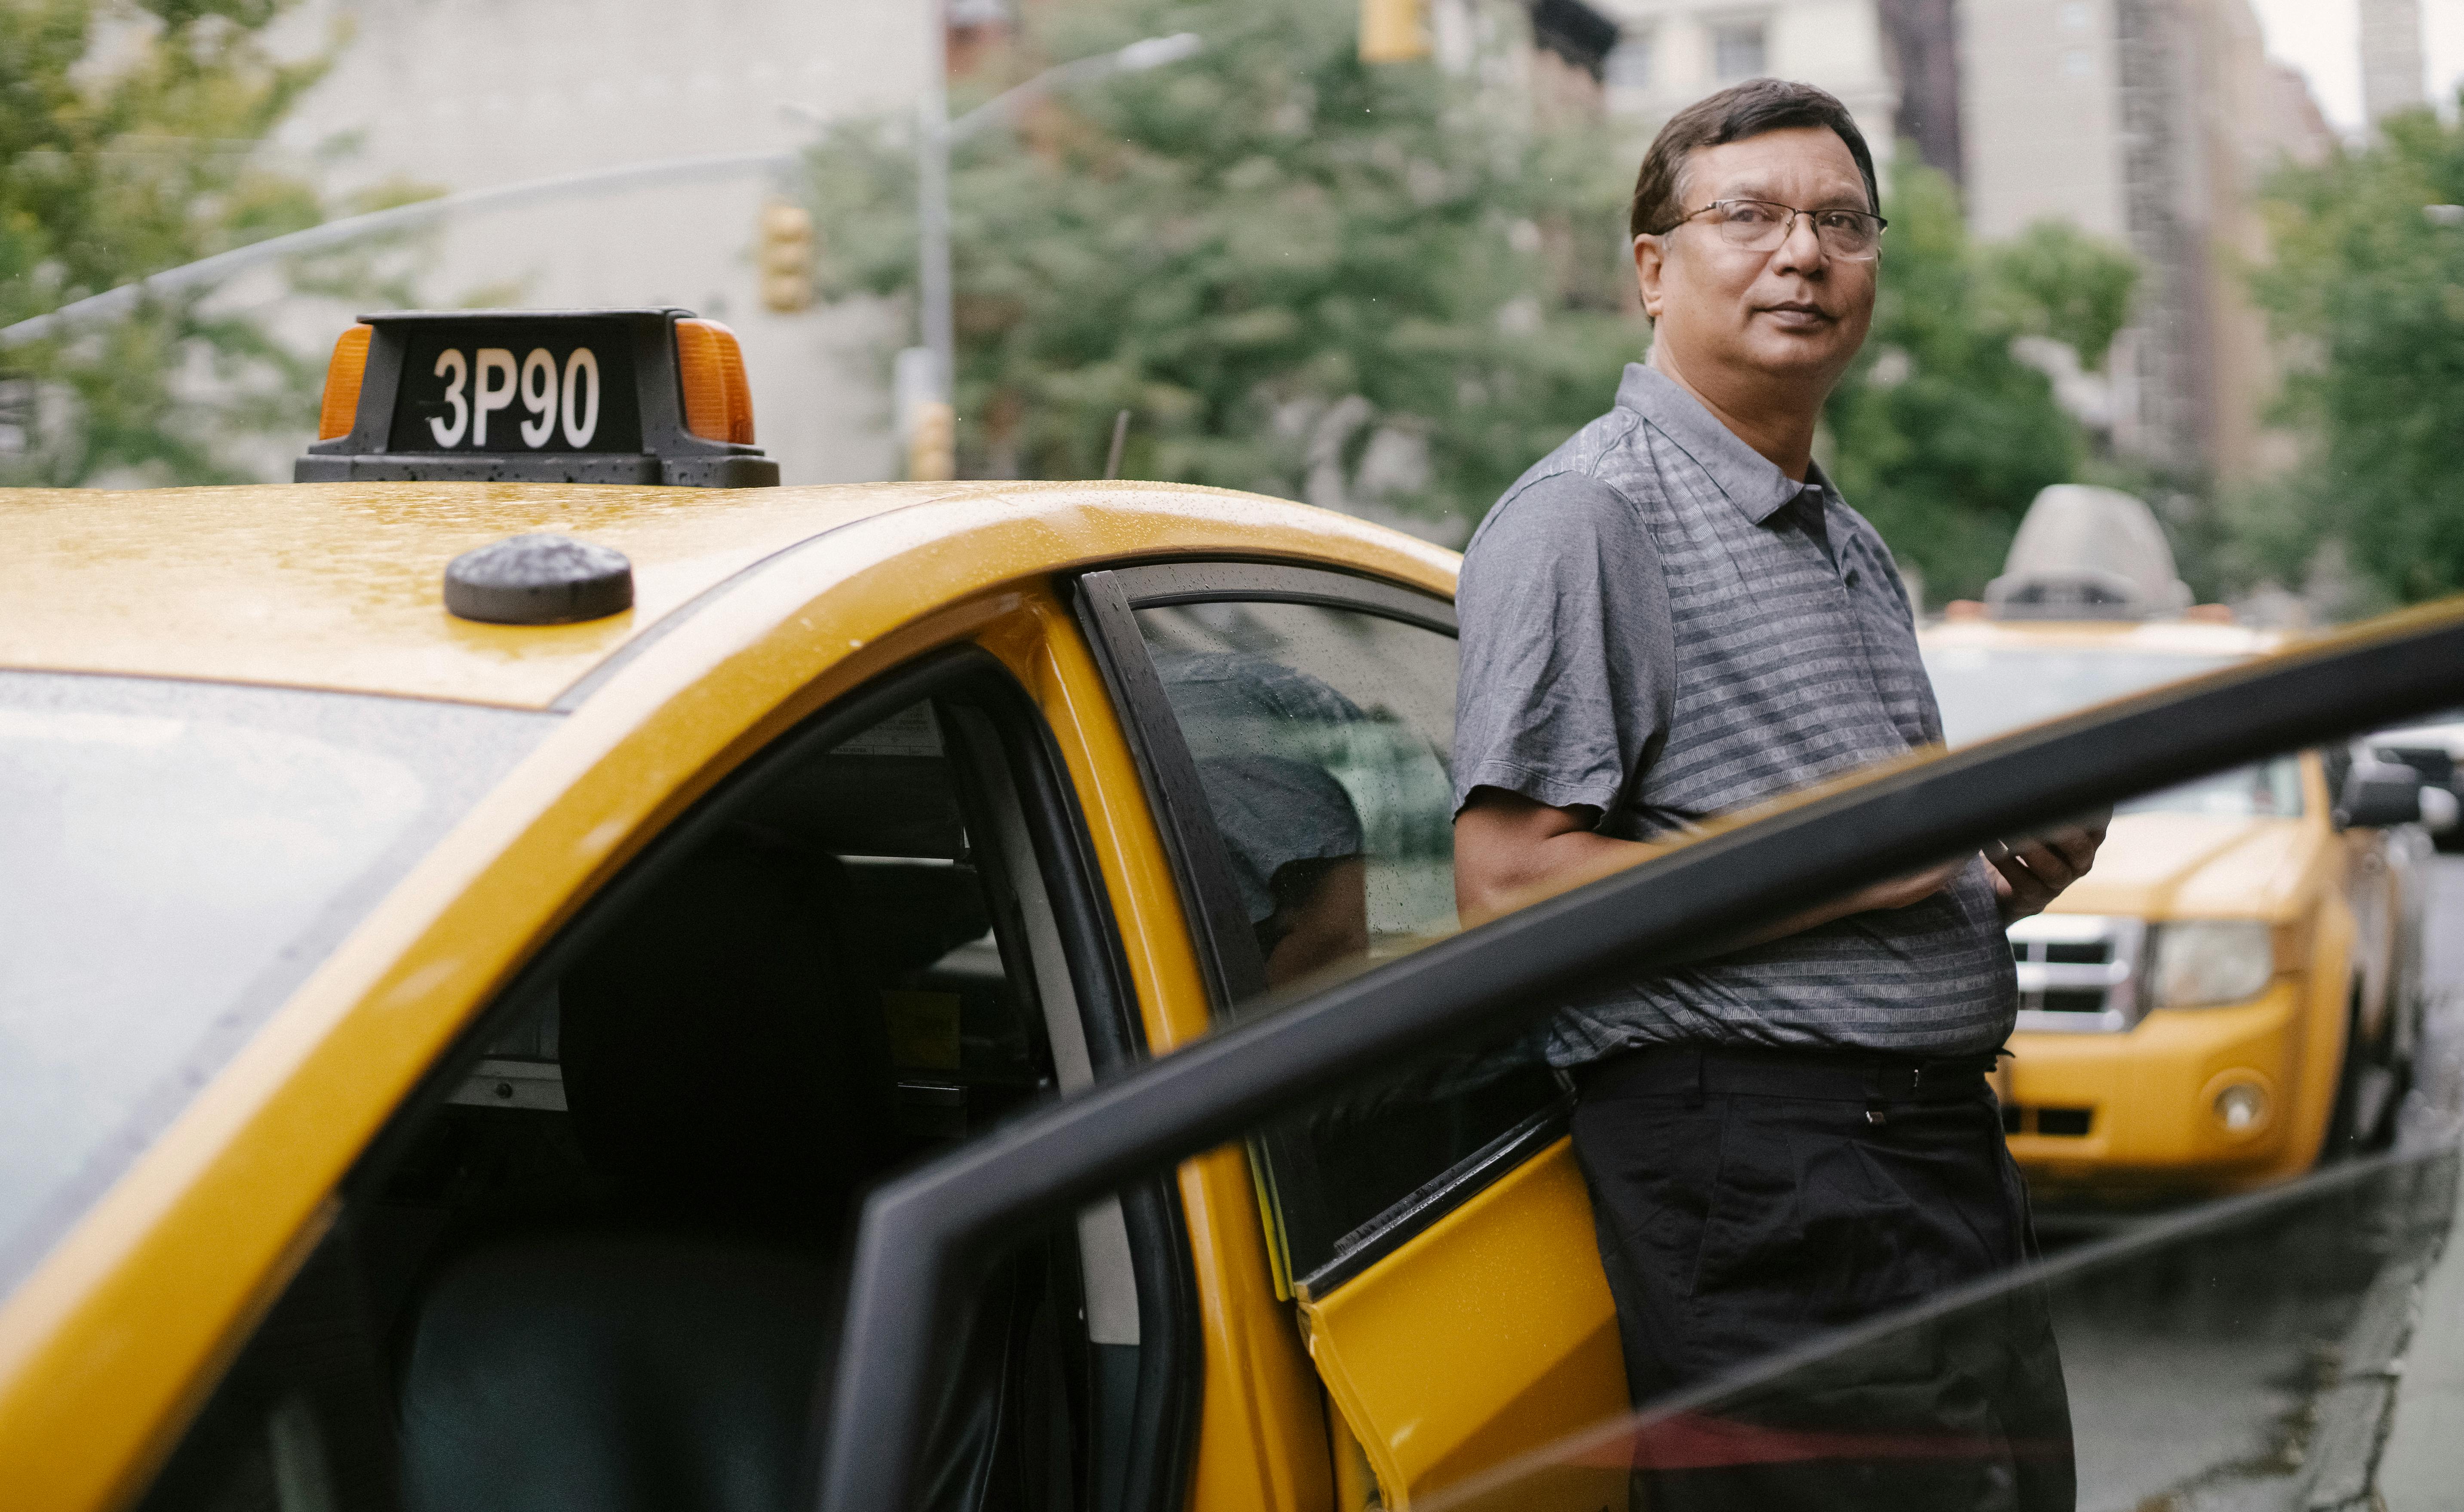 A man standing beside the taxi | Source: Pexels